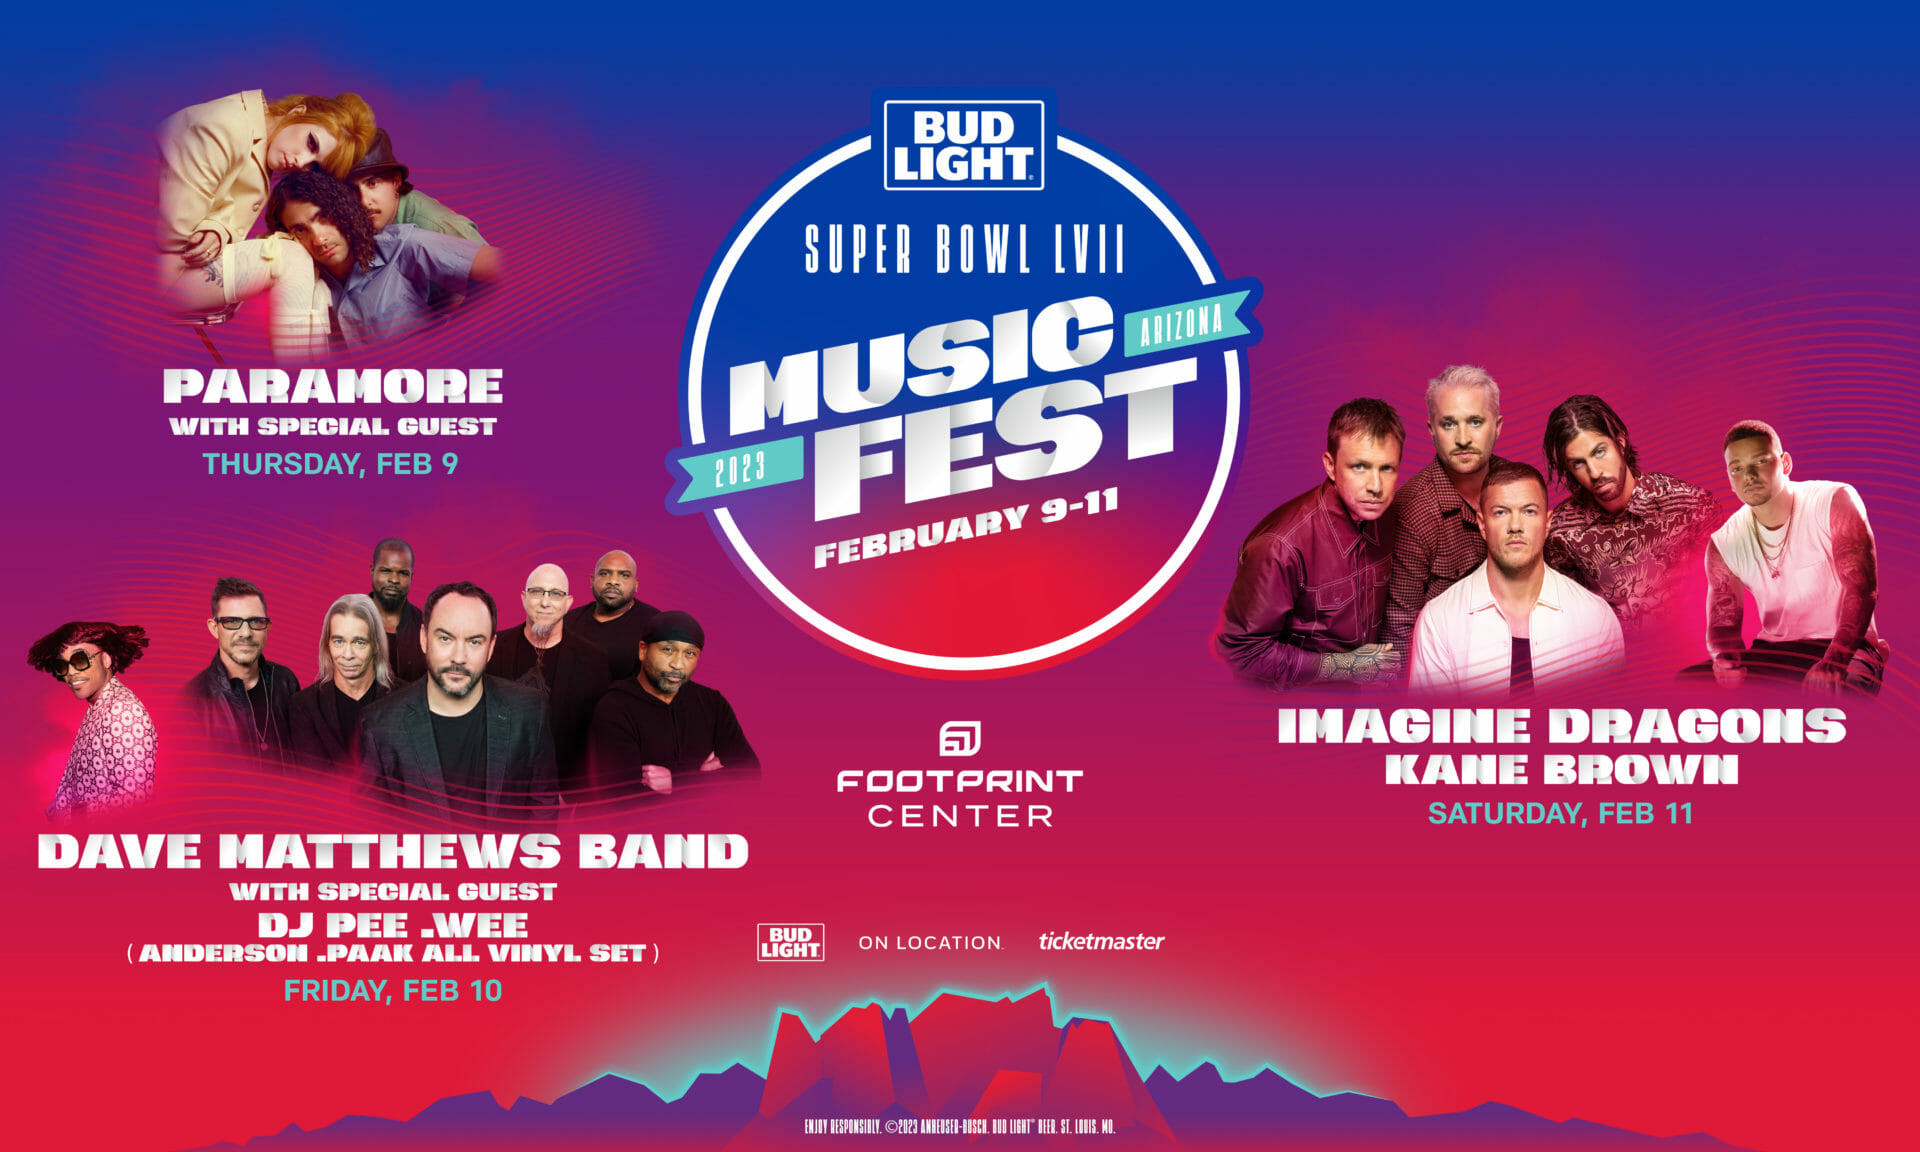 Dave Matthews Band, Imagine Dragons, Paramore and More to Perform at Bud Light Super Bowl Music Festival